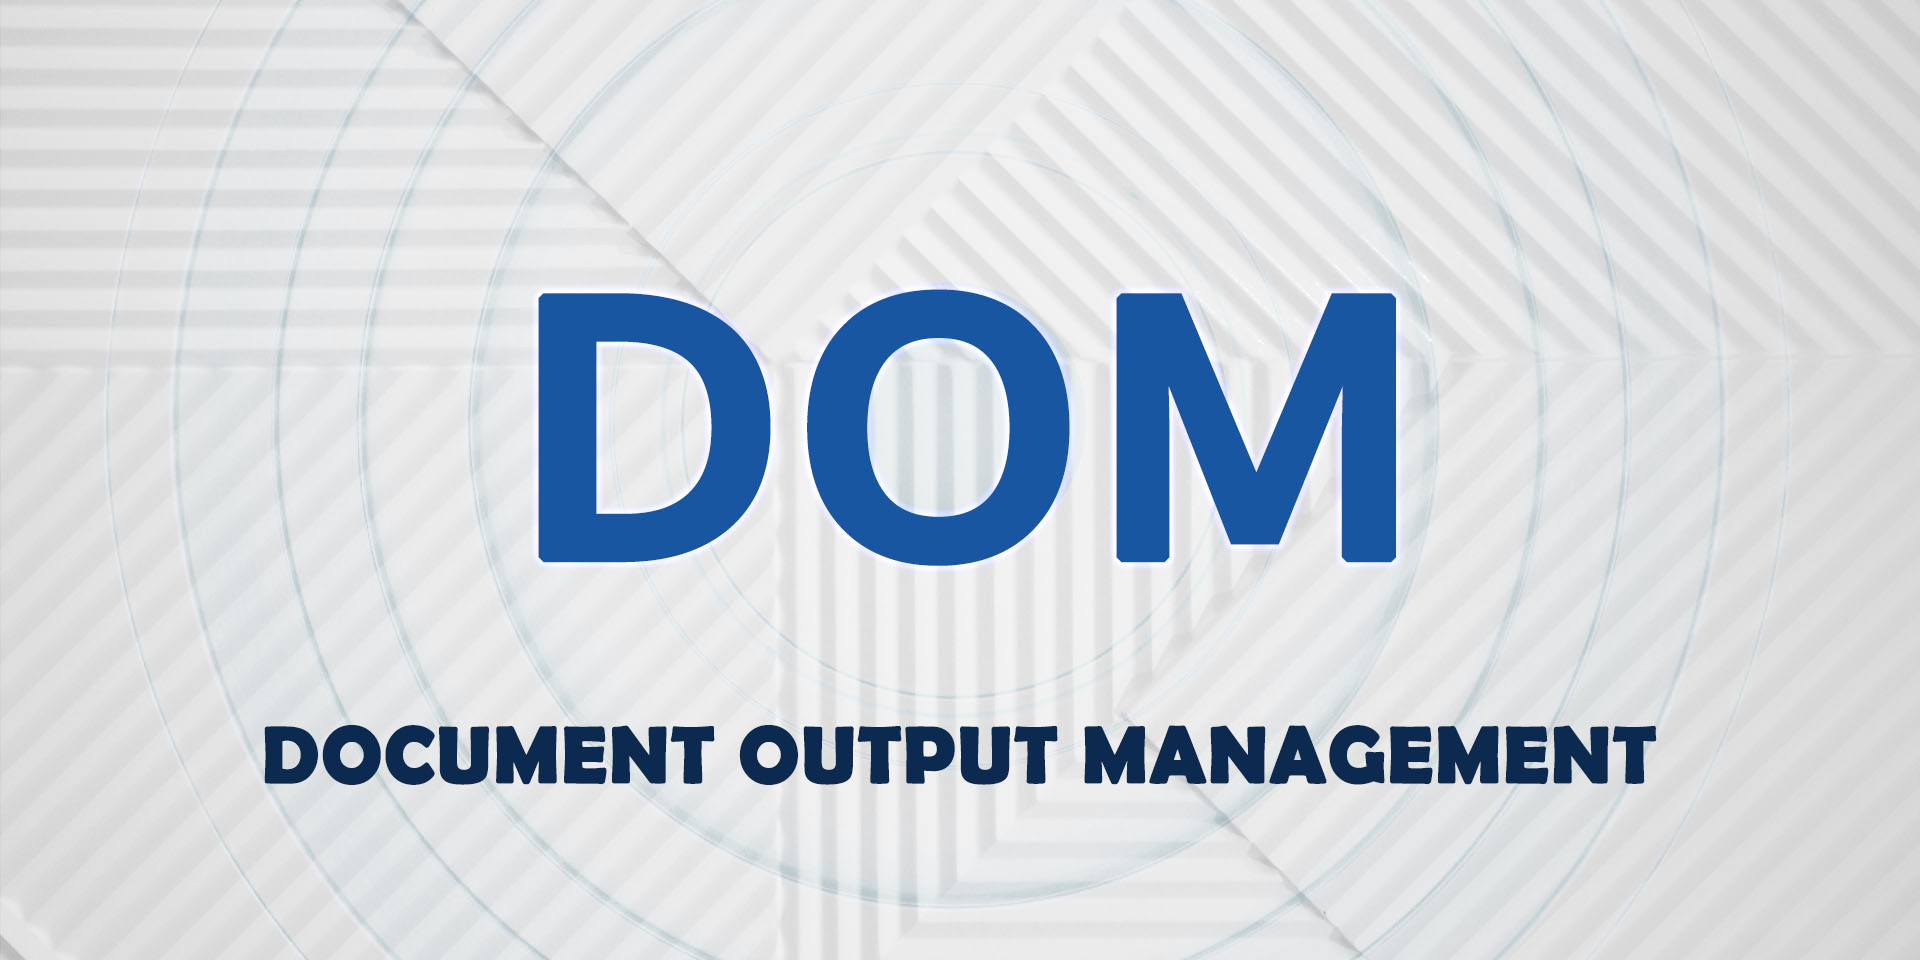 Document Output Management (DOM) is the first step in implementing an Enterprise Content Management system with multichannel outputs.